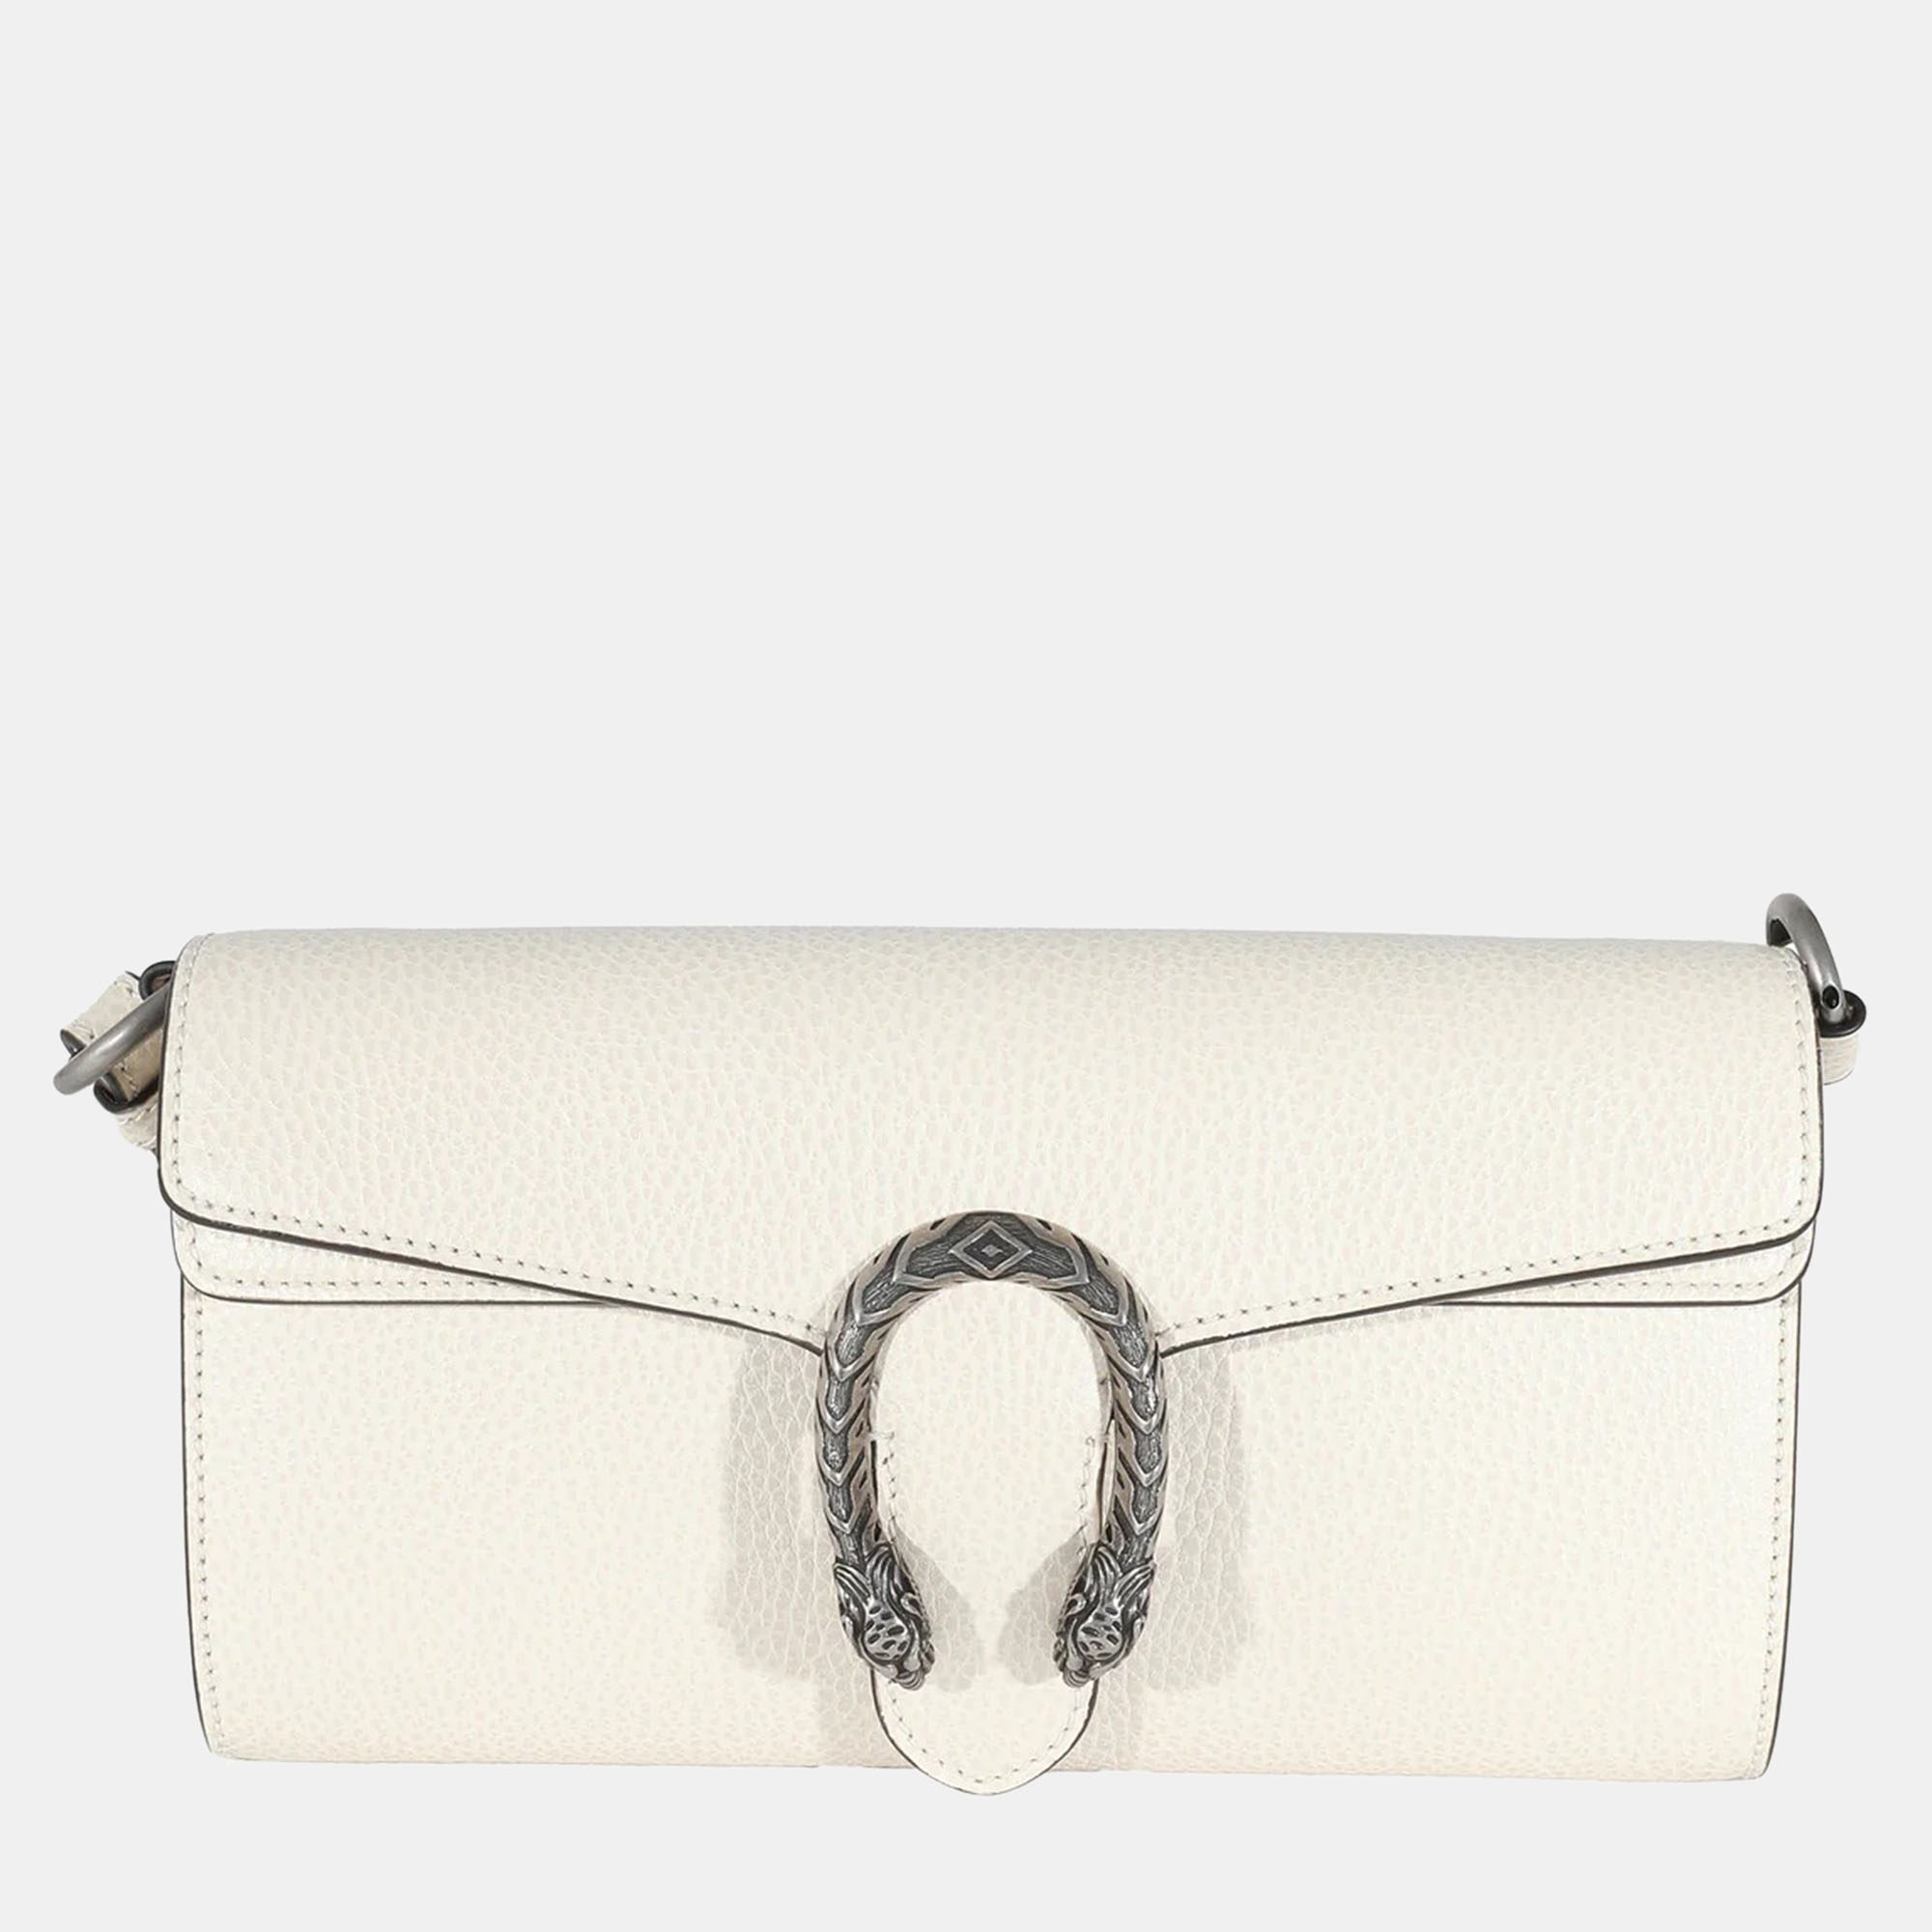 Gucci white leather small dionysus shoulder bag